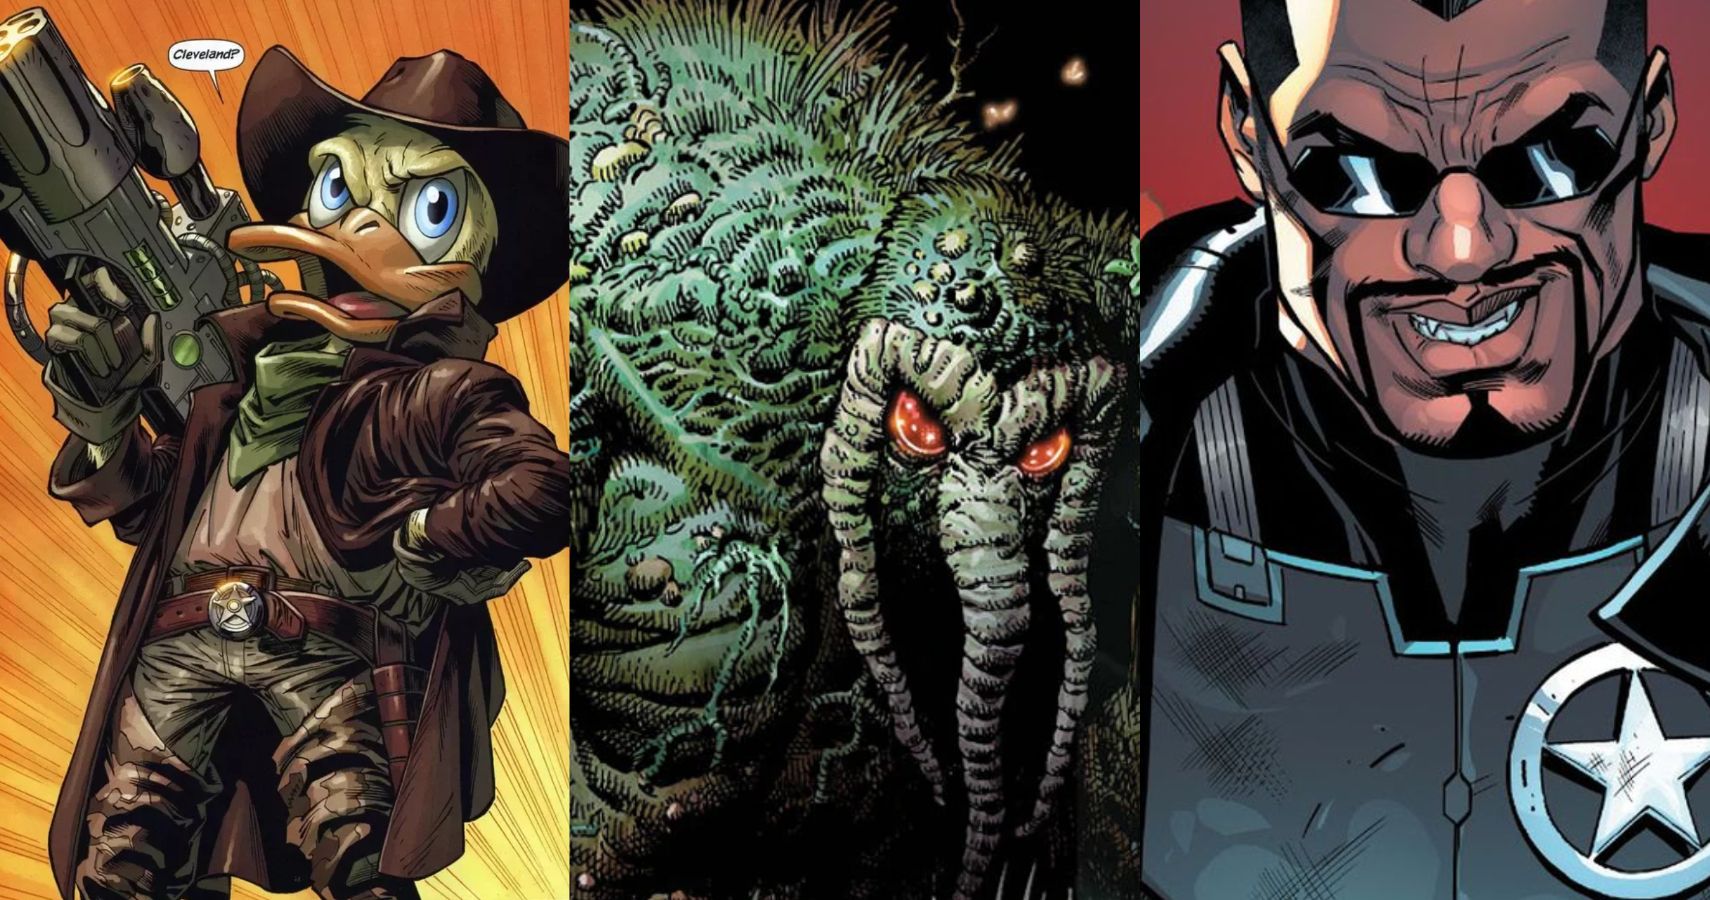 A combined image featuring several characters that deserve a new ongoing series, including Howard the Duck, Man-Thing and Blade.